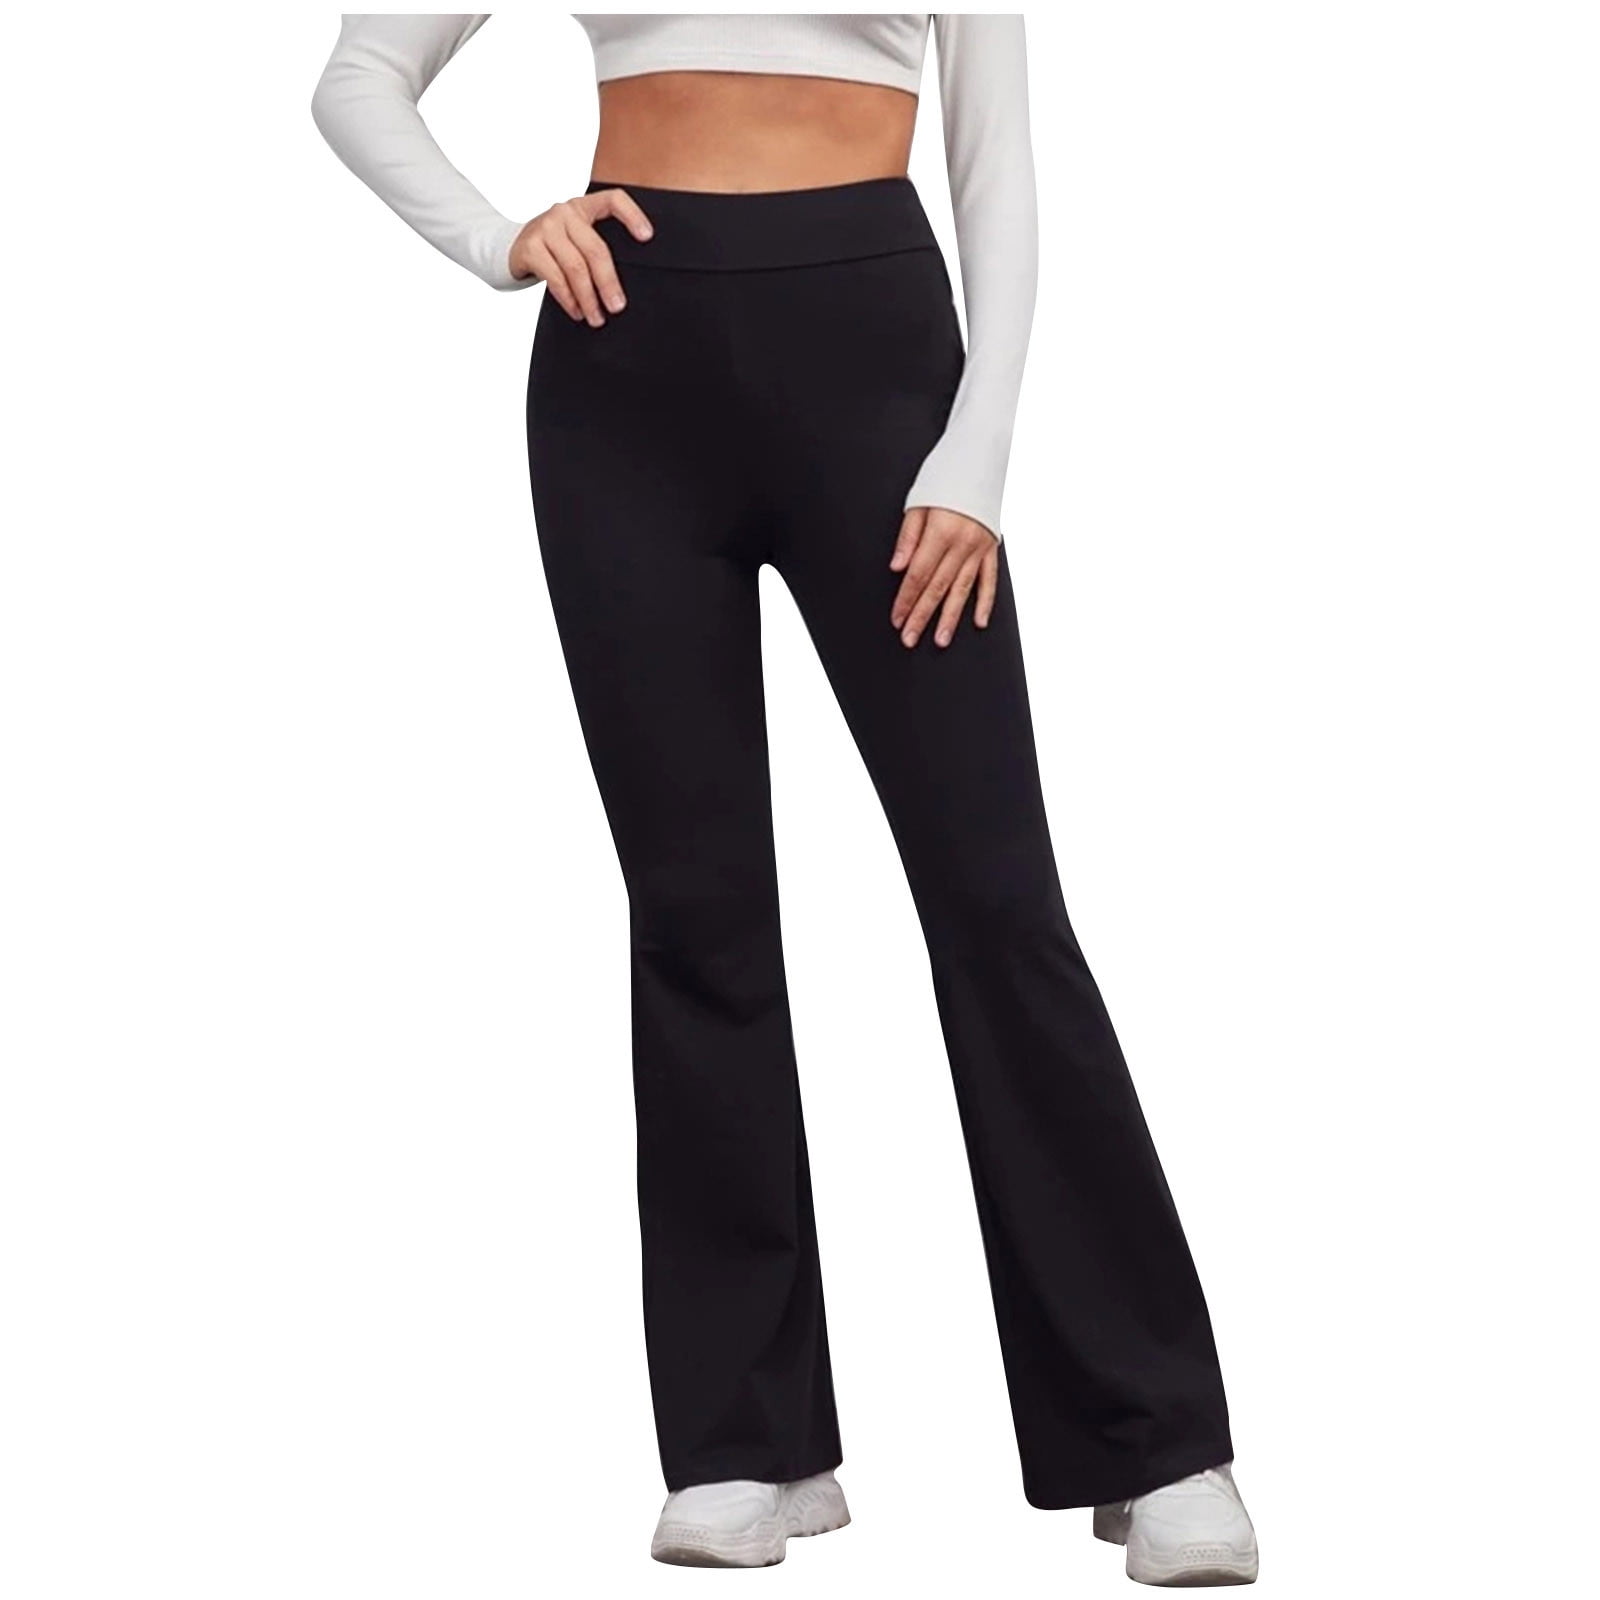  G4Free Yoga Pants For Women Wide Leg Dress Pants High Waist Stretchy  Flare Pants For Casual Work Business